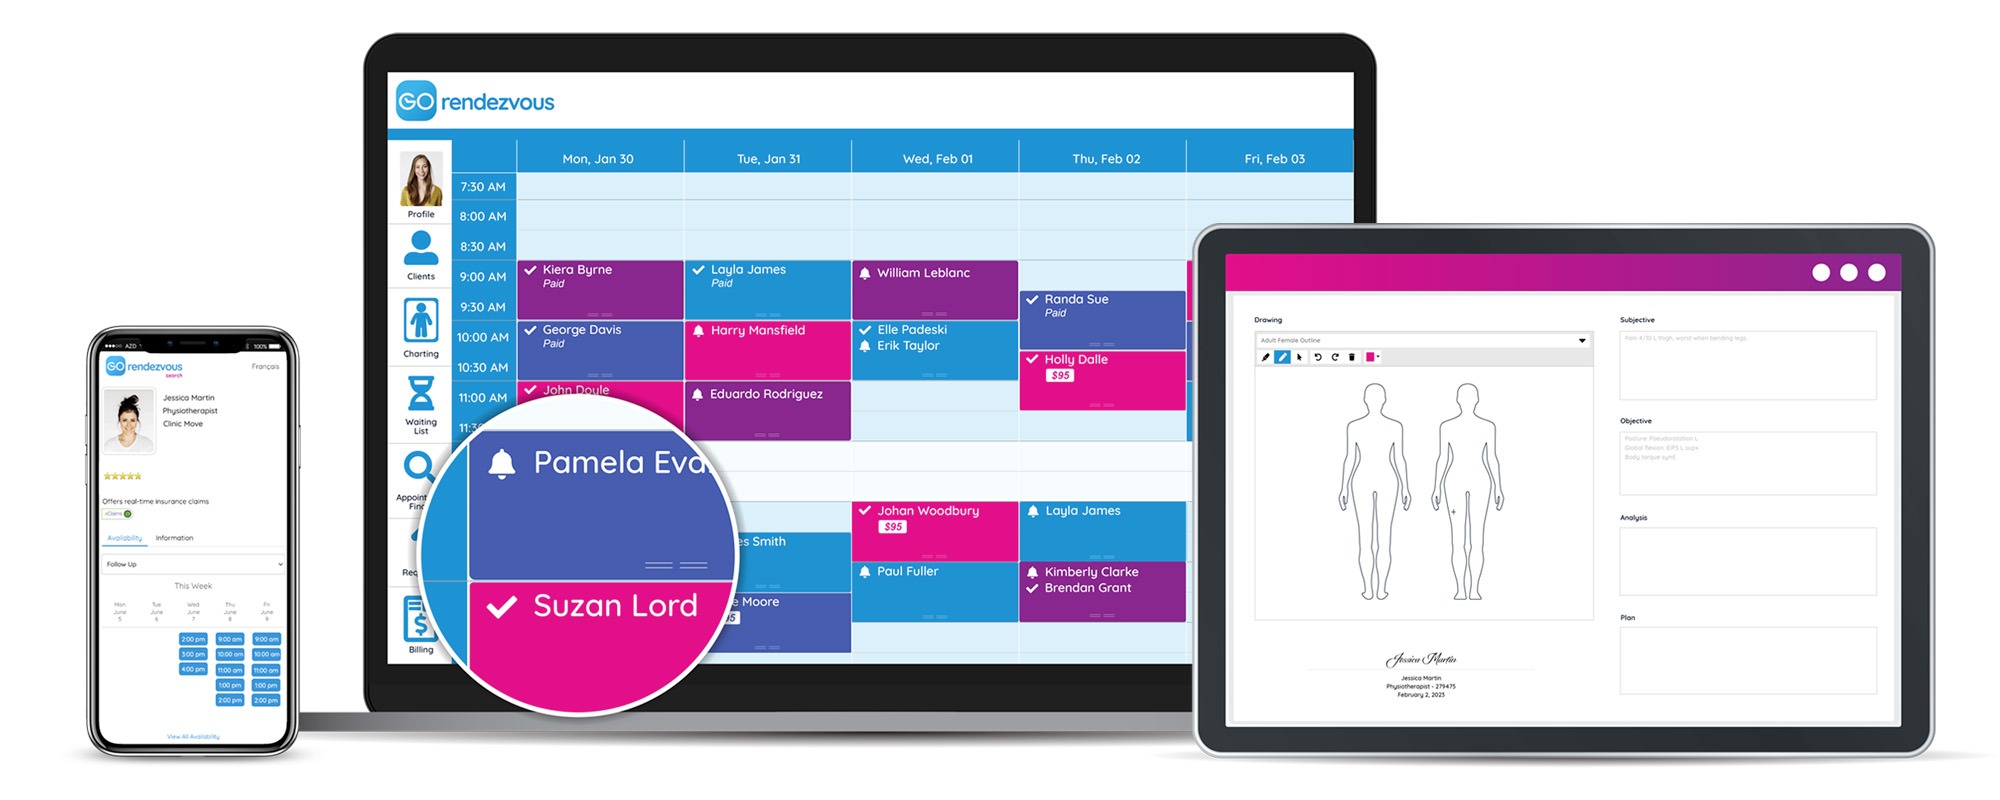 A view of a osteopath's GOrendezvous schedule on different devices